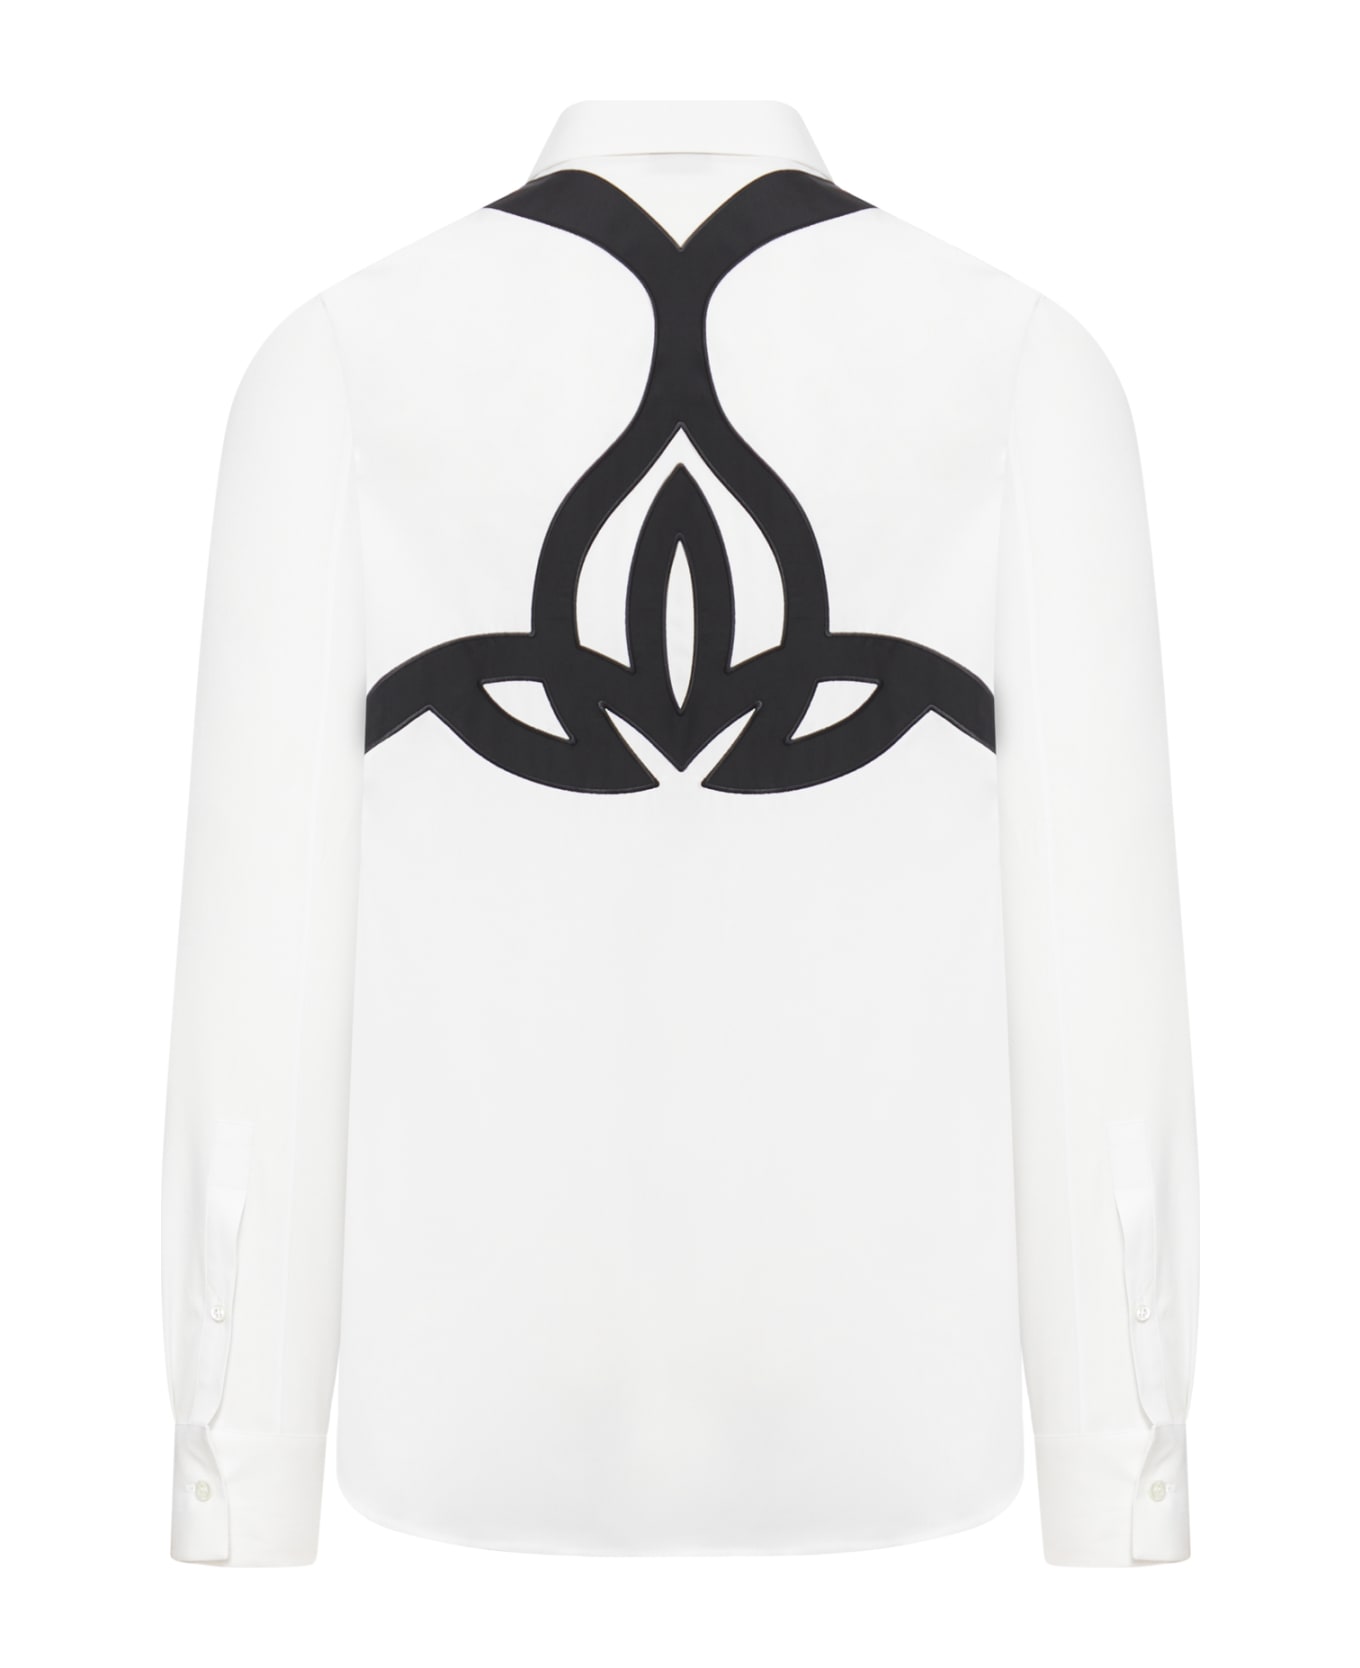 Alexander McQueen Graphic Printed Long Sleeved Shirt - Optical White シャツ